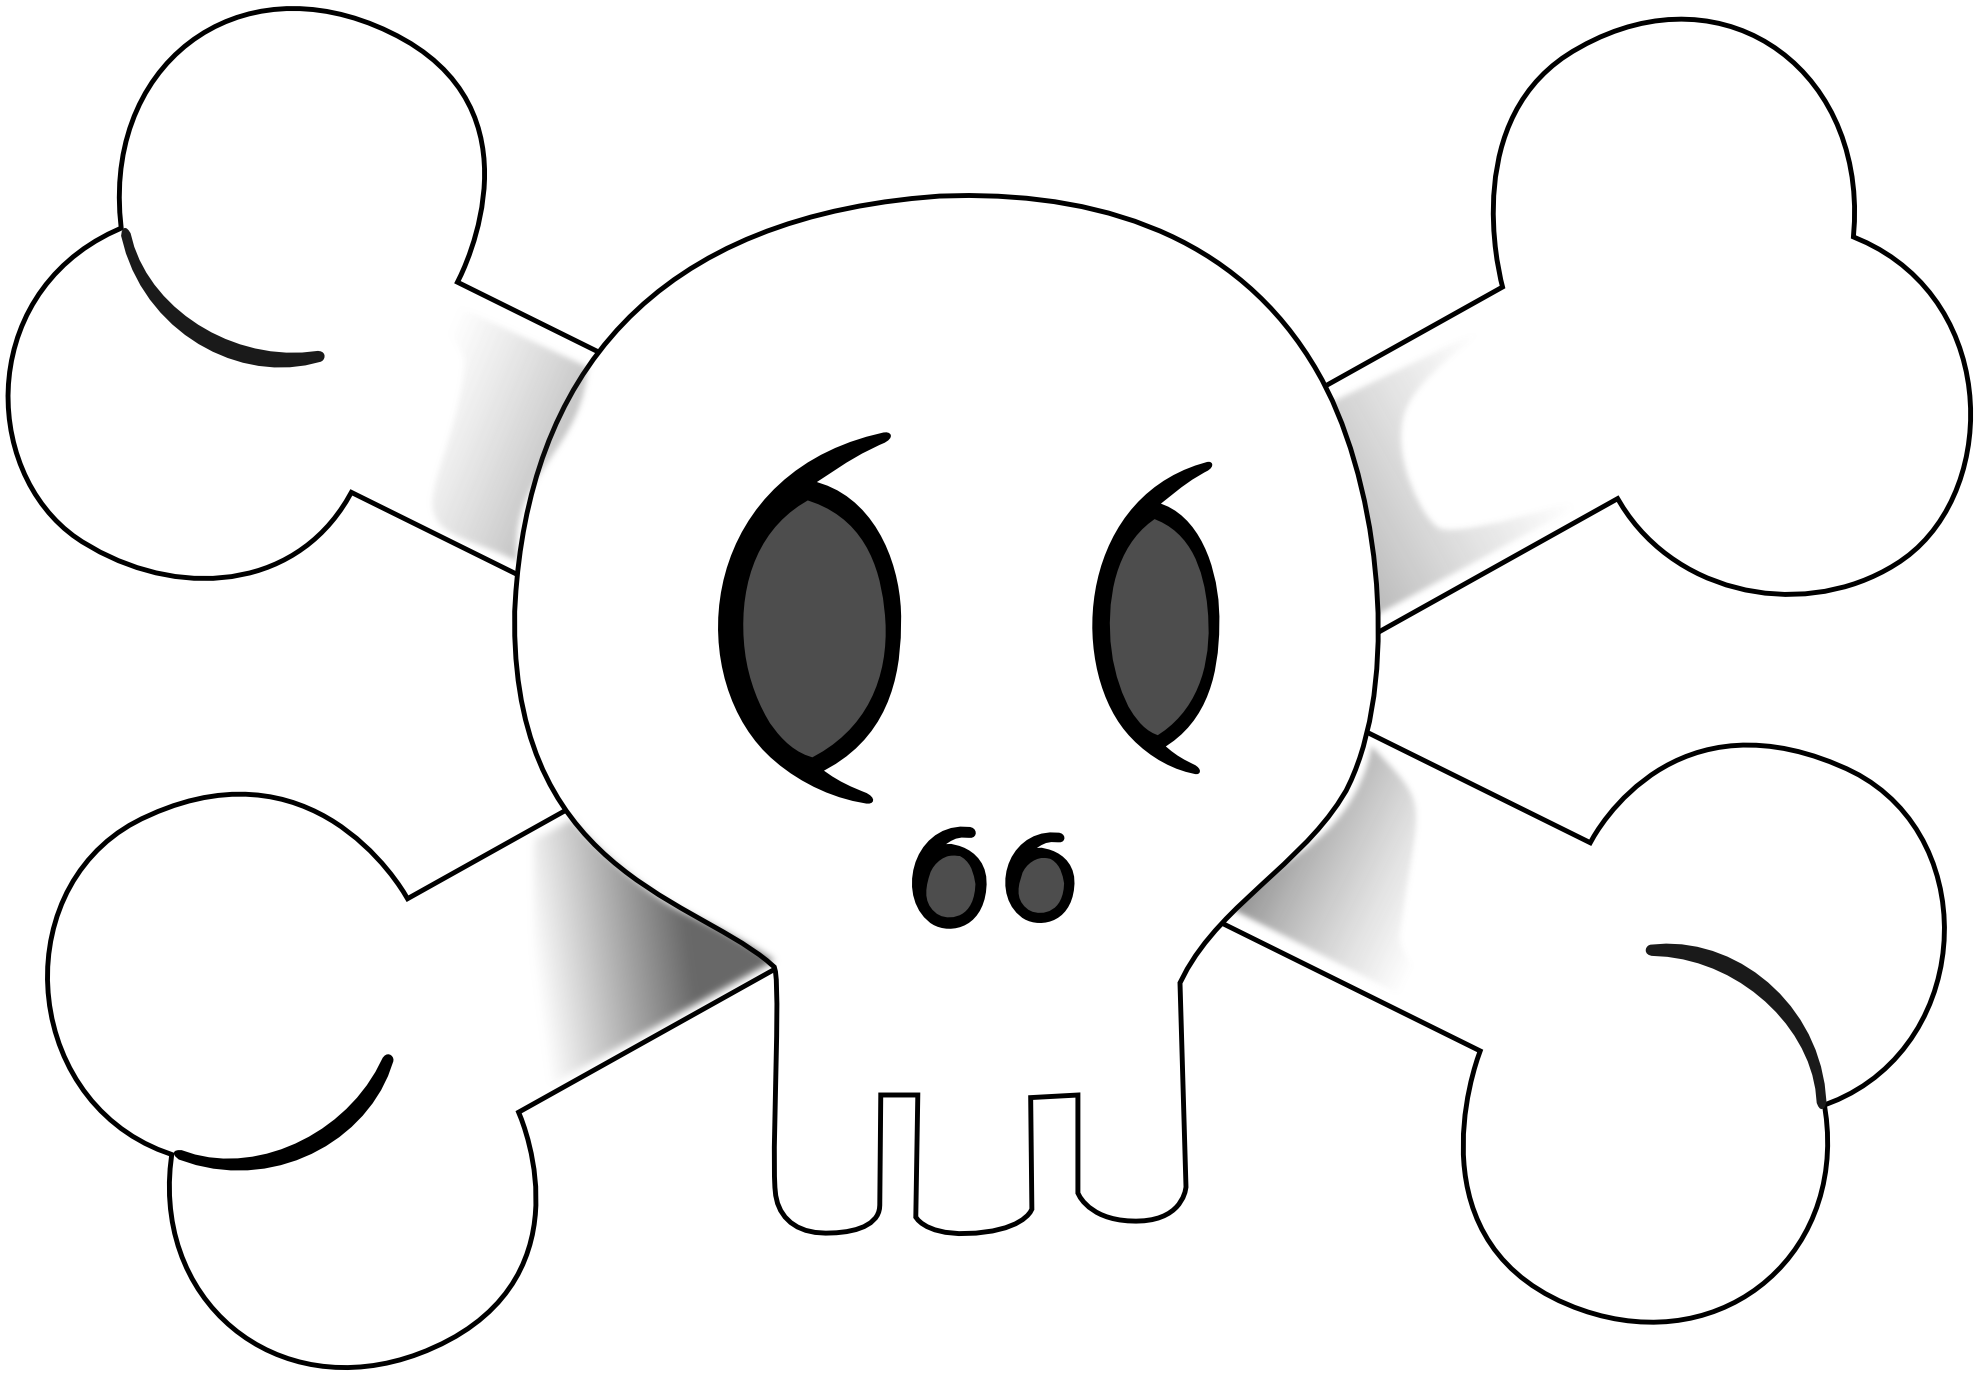 pirate flag clipart black and - Pirate Flag Clipart